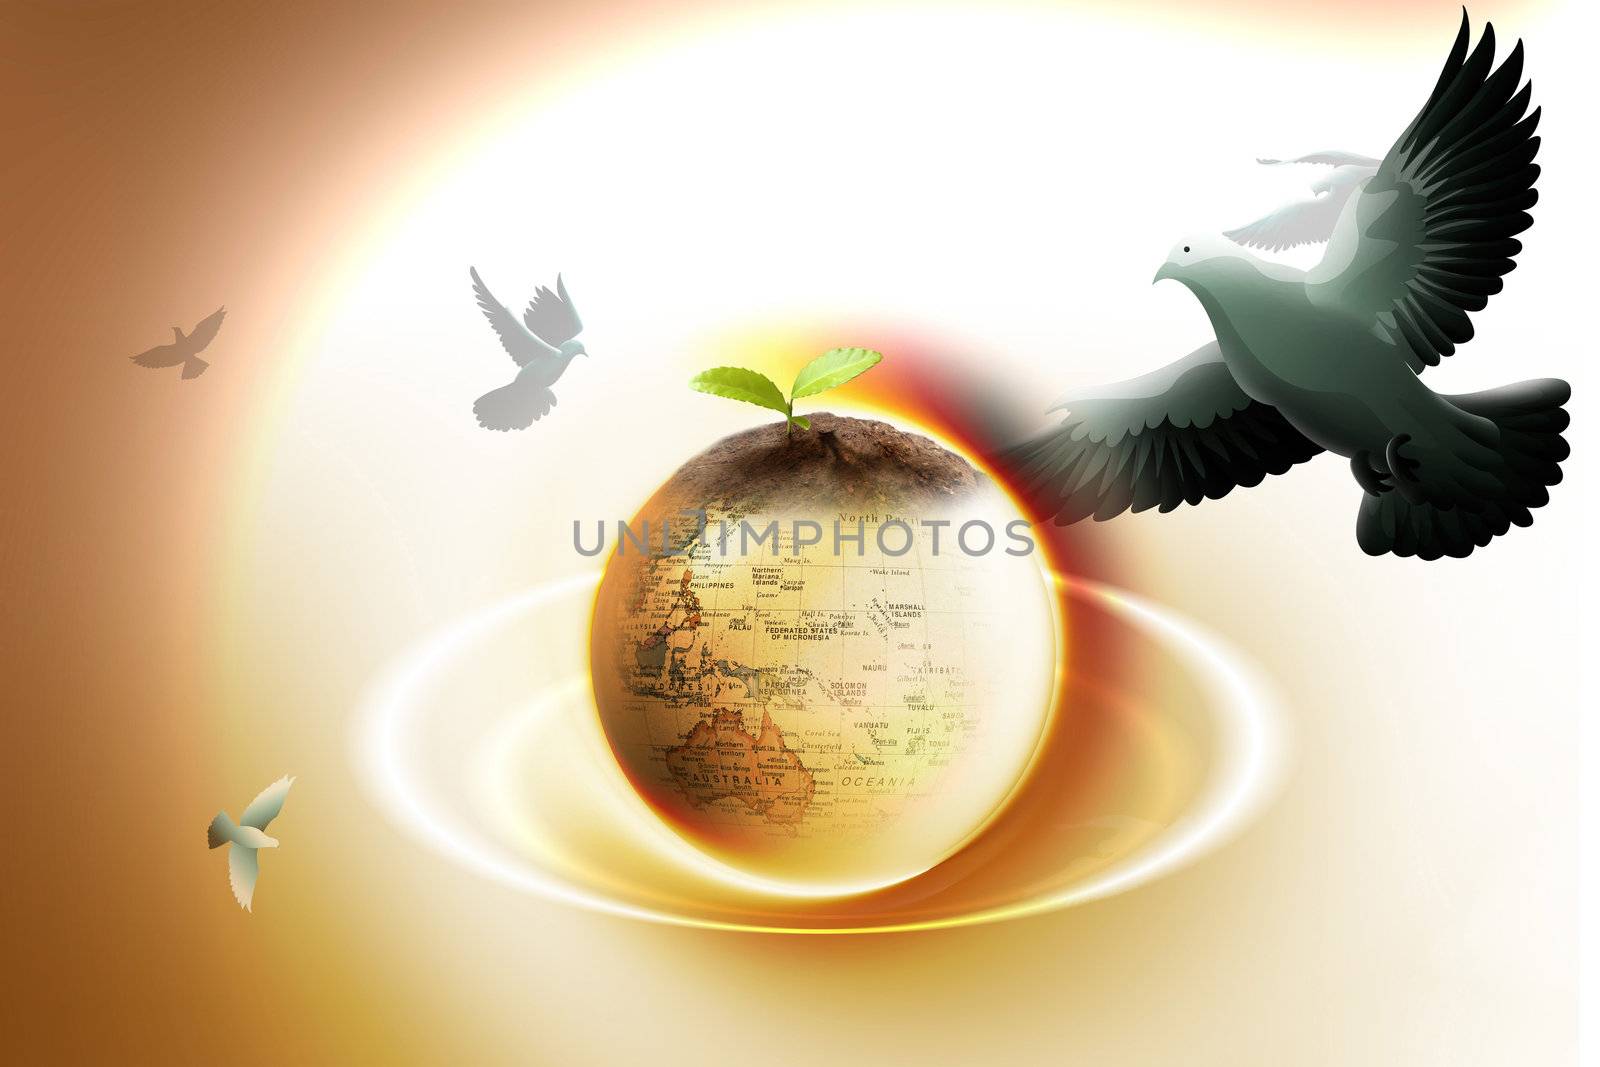 It is a picture with globes and pigeon